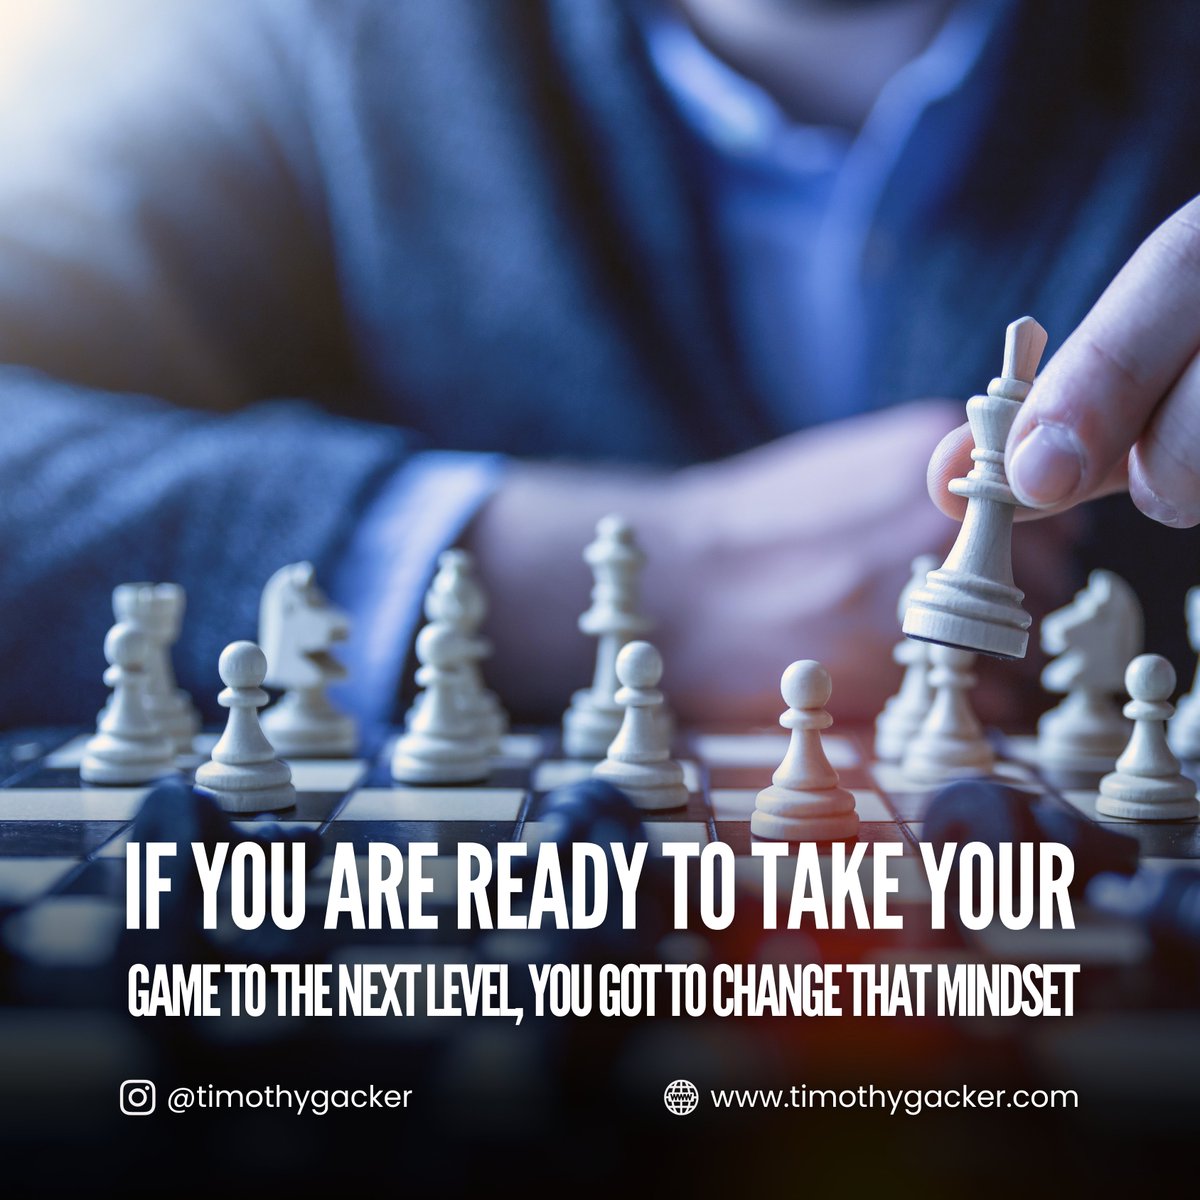 Leveling up isn't just about skills – it's about rewiring your mindset for success. 

The journey to greatness begins when you break free from old limits and embrace a mindset that knows no boundaries.   

#nextlevelmindset #gamechanger #riseabove #successmindset